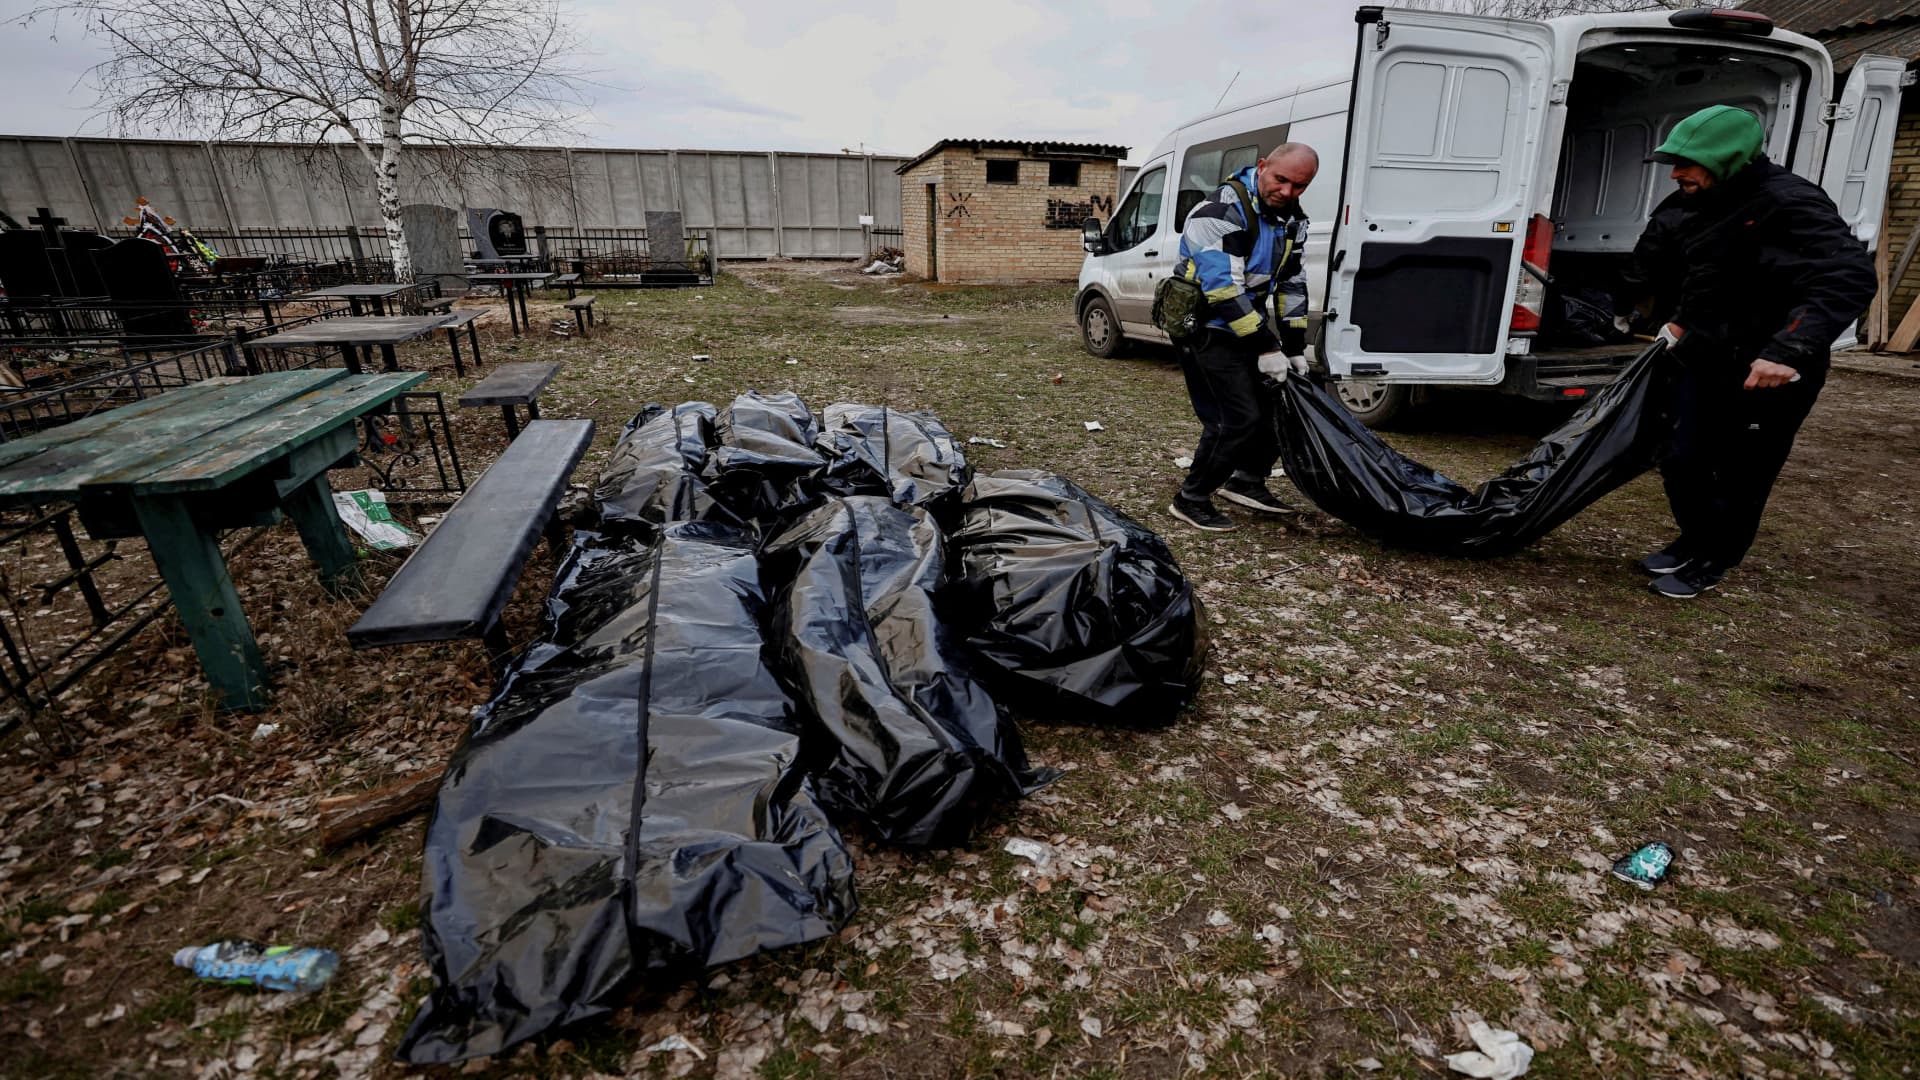 Volunteers unload from a van bags containing bodies of civilians, who according to residents were killed by Russian army soldiers, after they collected them from the streets to gather them at a cemetery before they take them to the morgue, amid Russia's invasion of Ukraine, in Bucha, in Kyiv region, Ukraine April 4, 2022. 